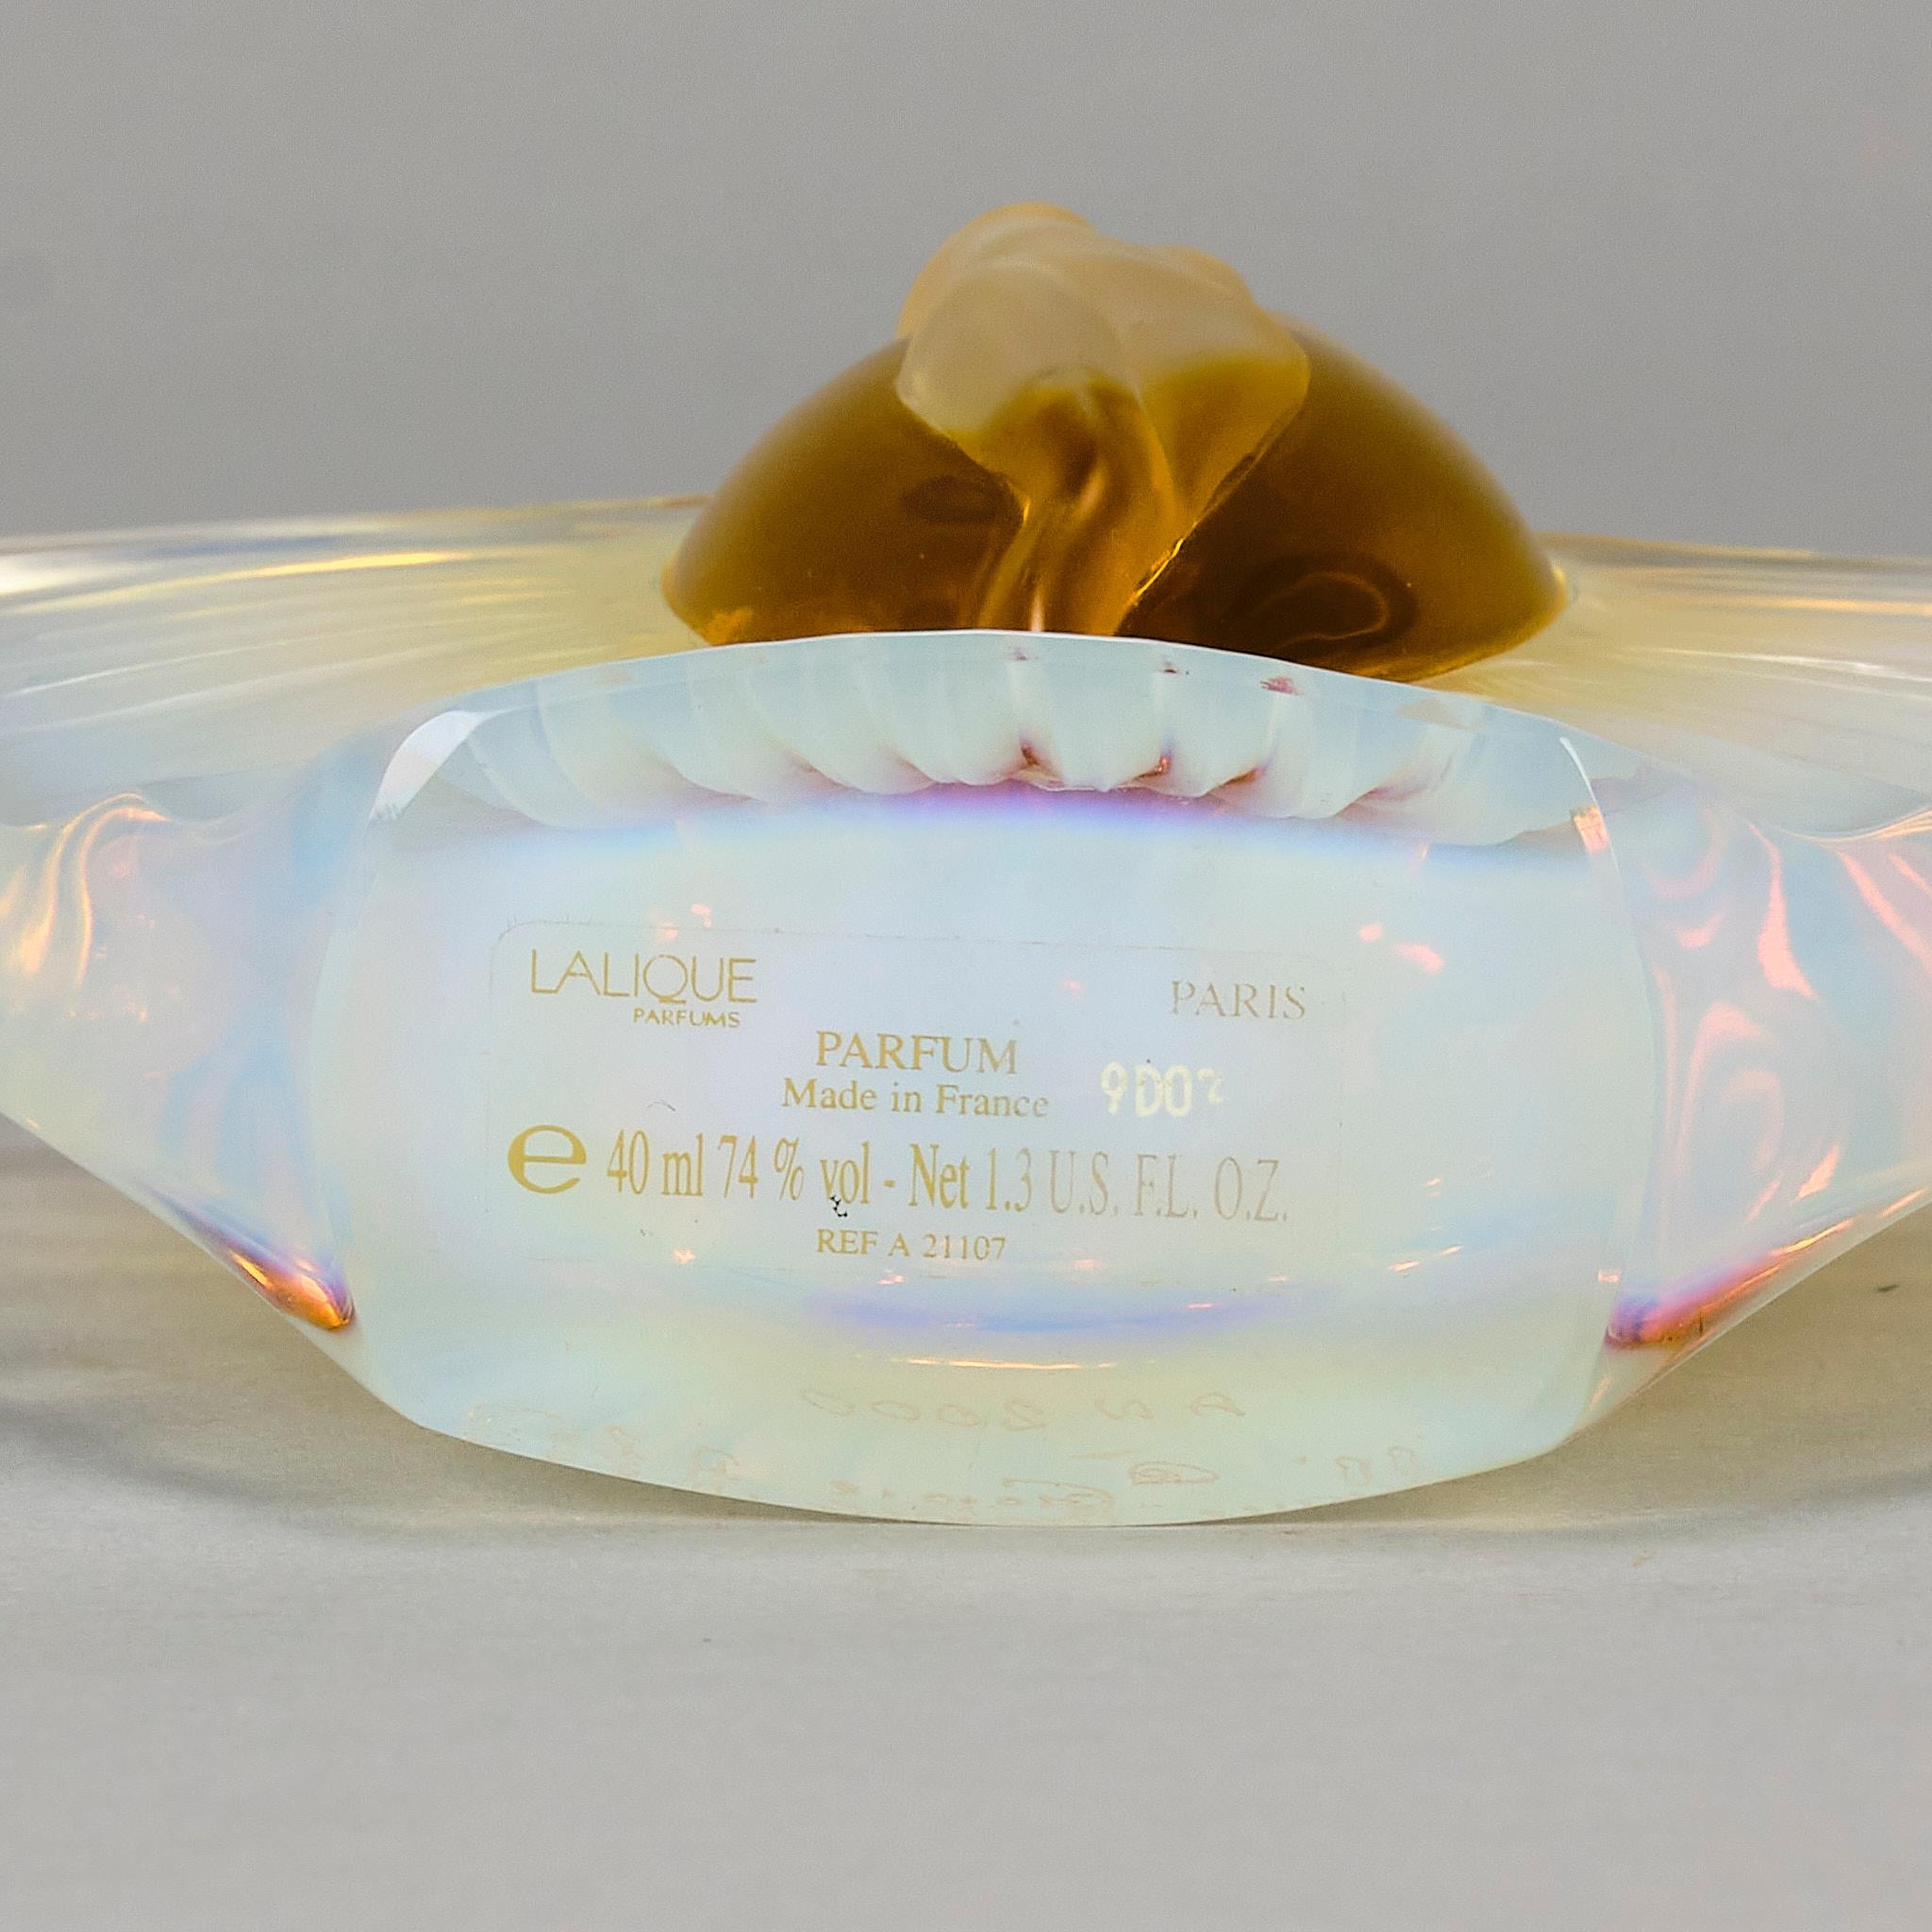 21st Century Limited Edition Opalescent Glass 